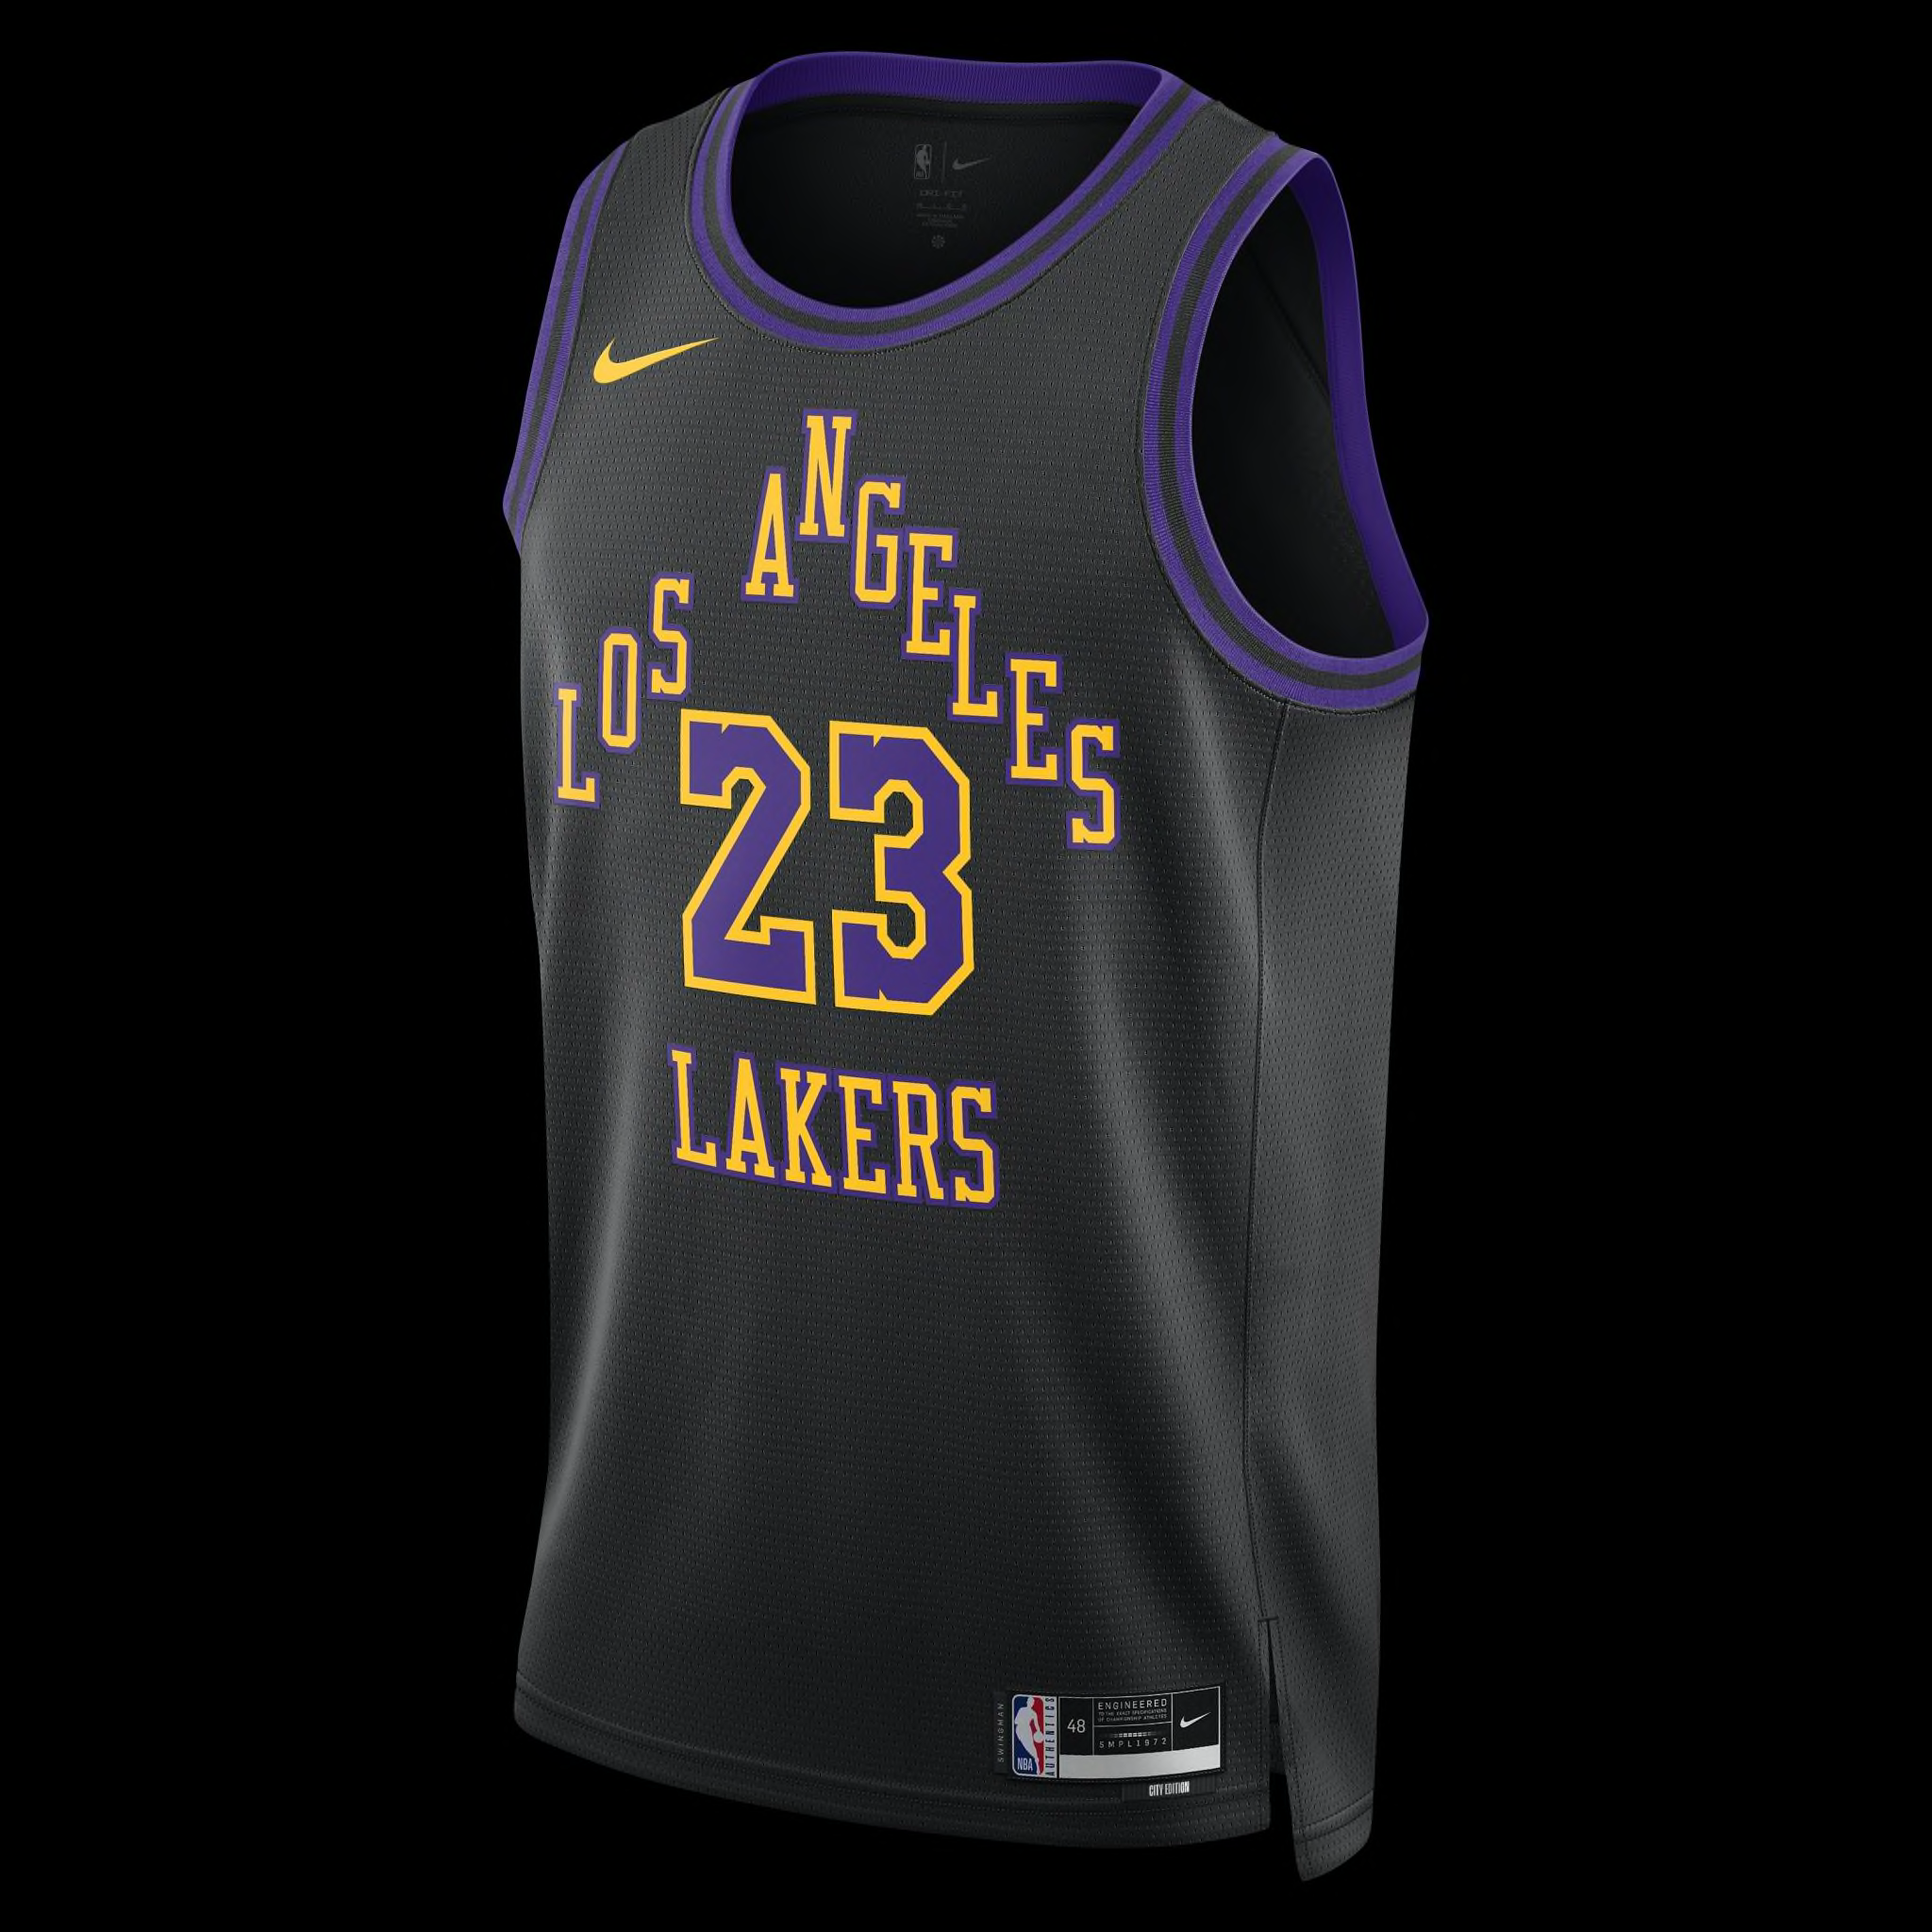 LakeShow - A full look at the Lakers' City Edition jersey